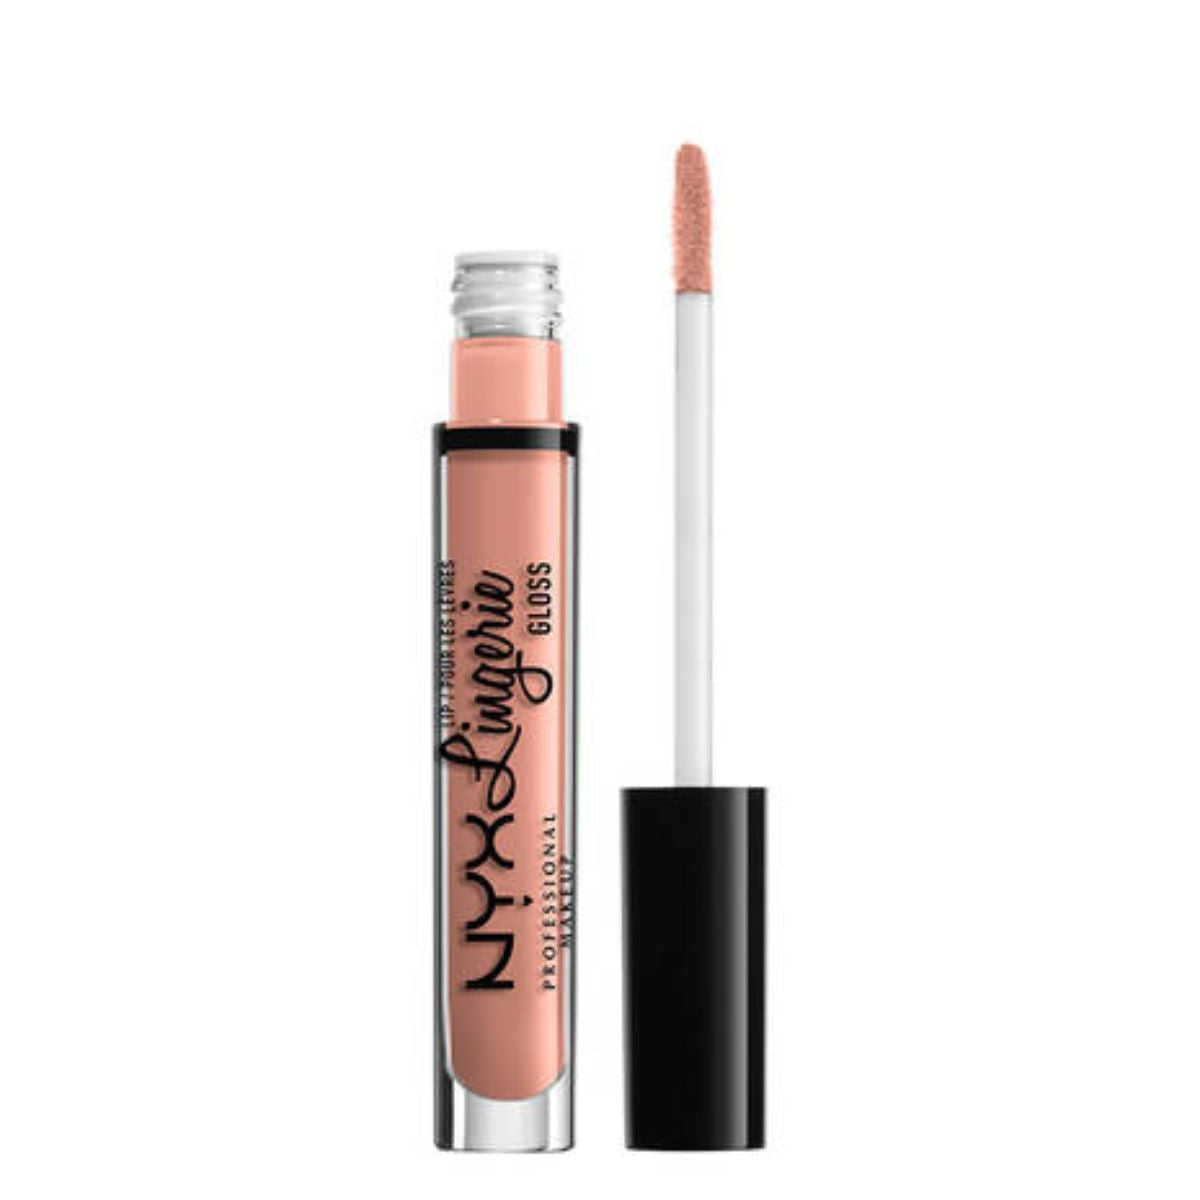 LIP LINGERIE GLOSS - OUTLET NYX PROFESSIONAL MAKEUP